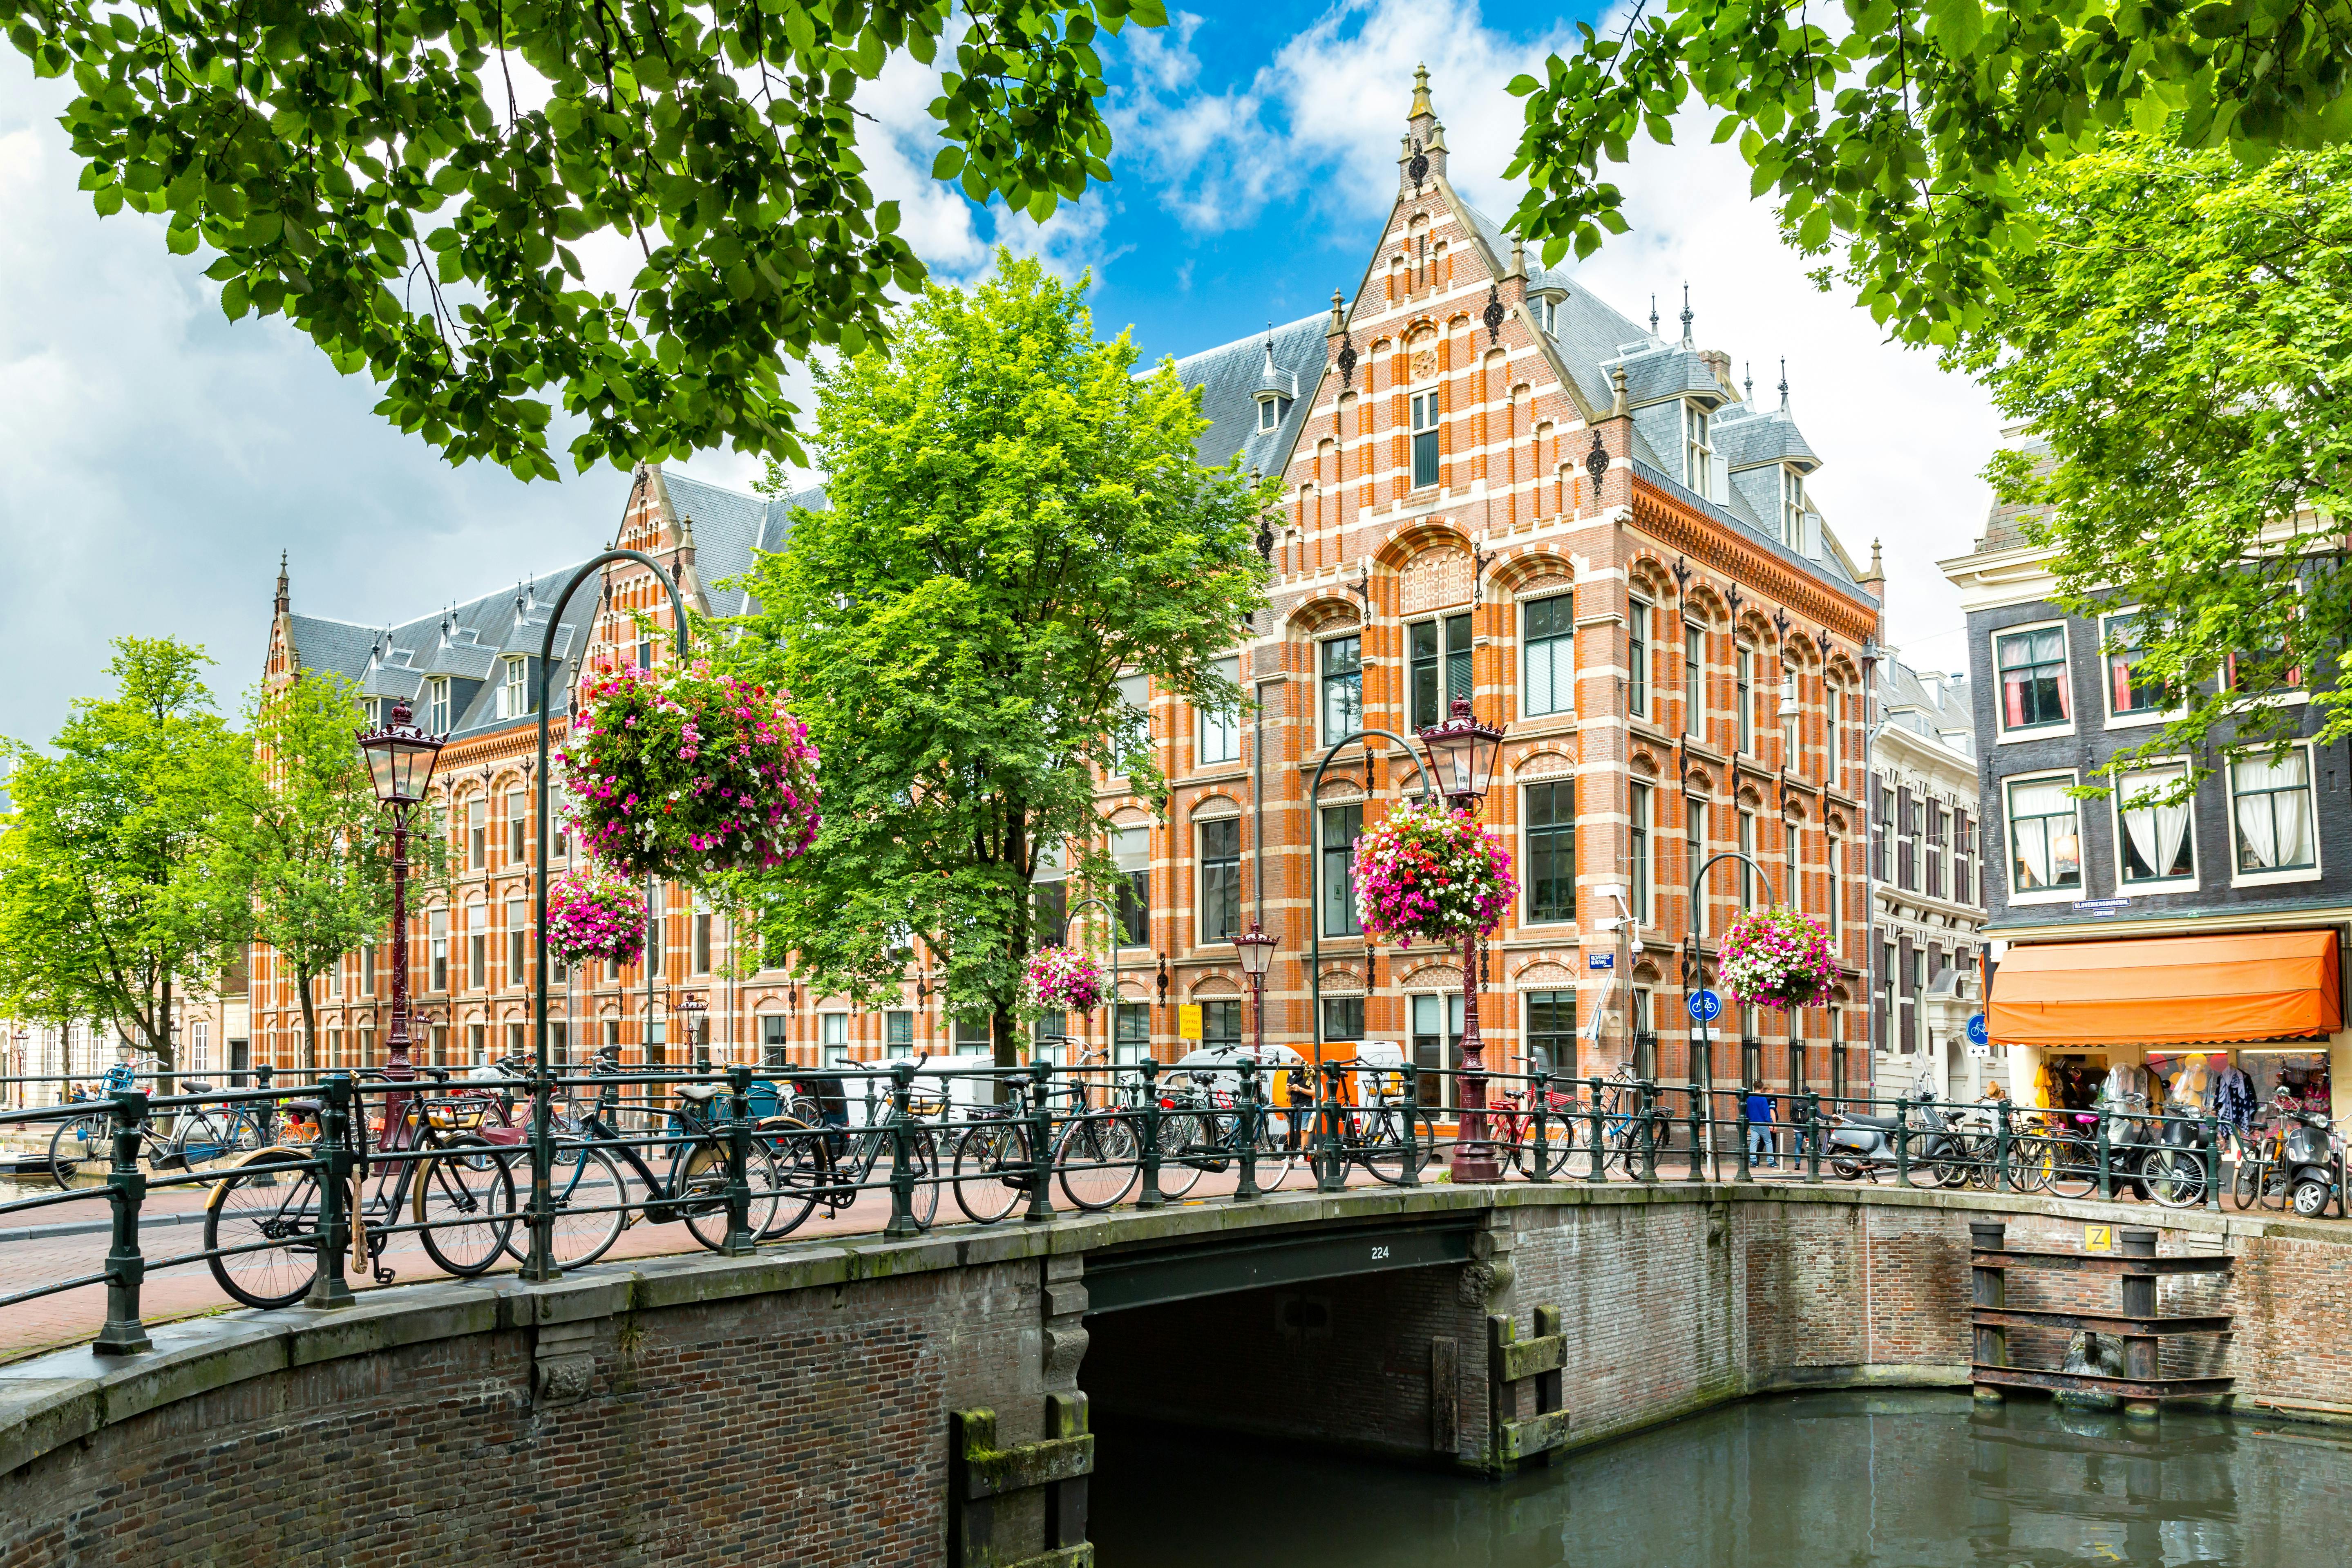 Private financial history tour of Amsterdam